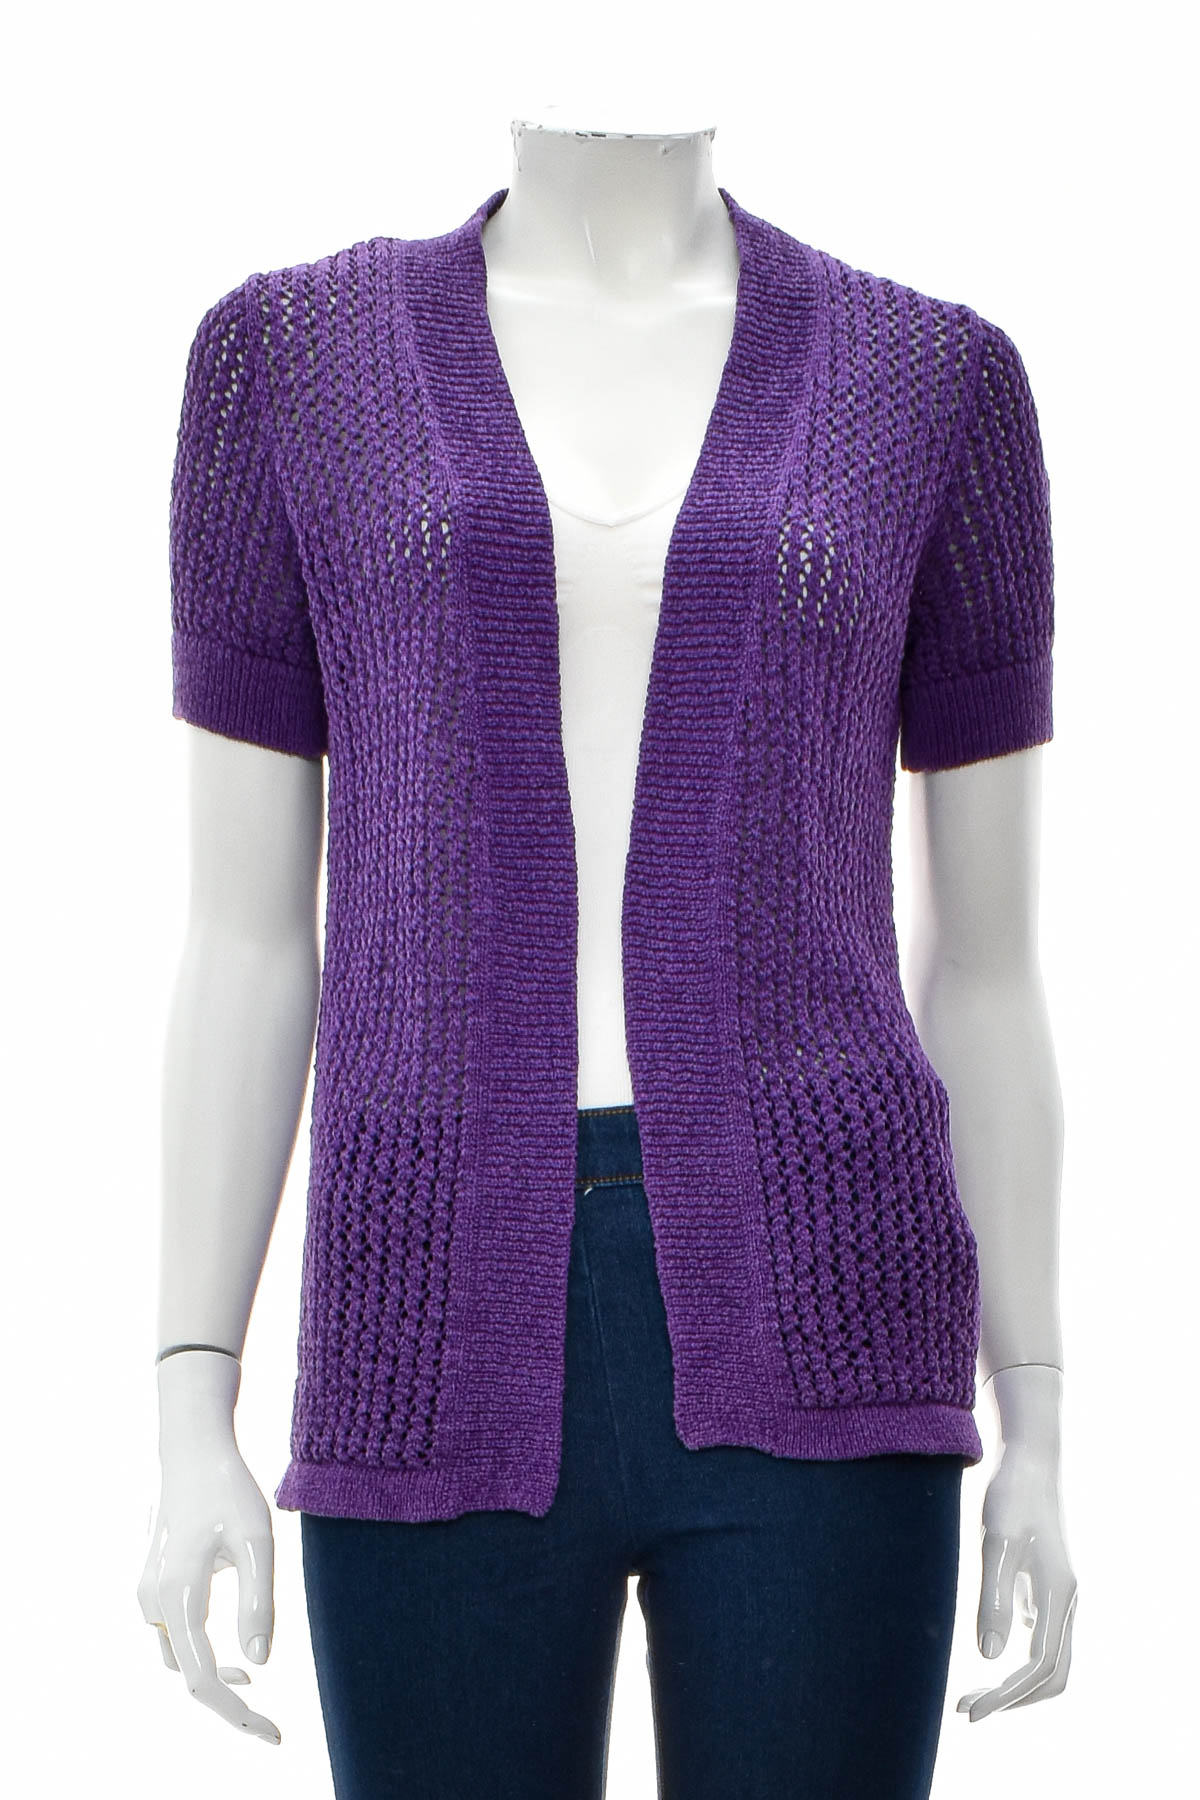 Women's cardigan - NORTHERN REFLECTIONS - 0